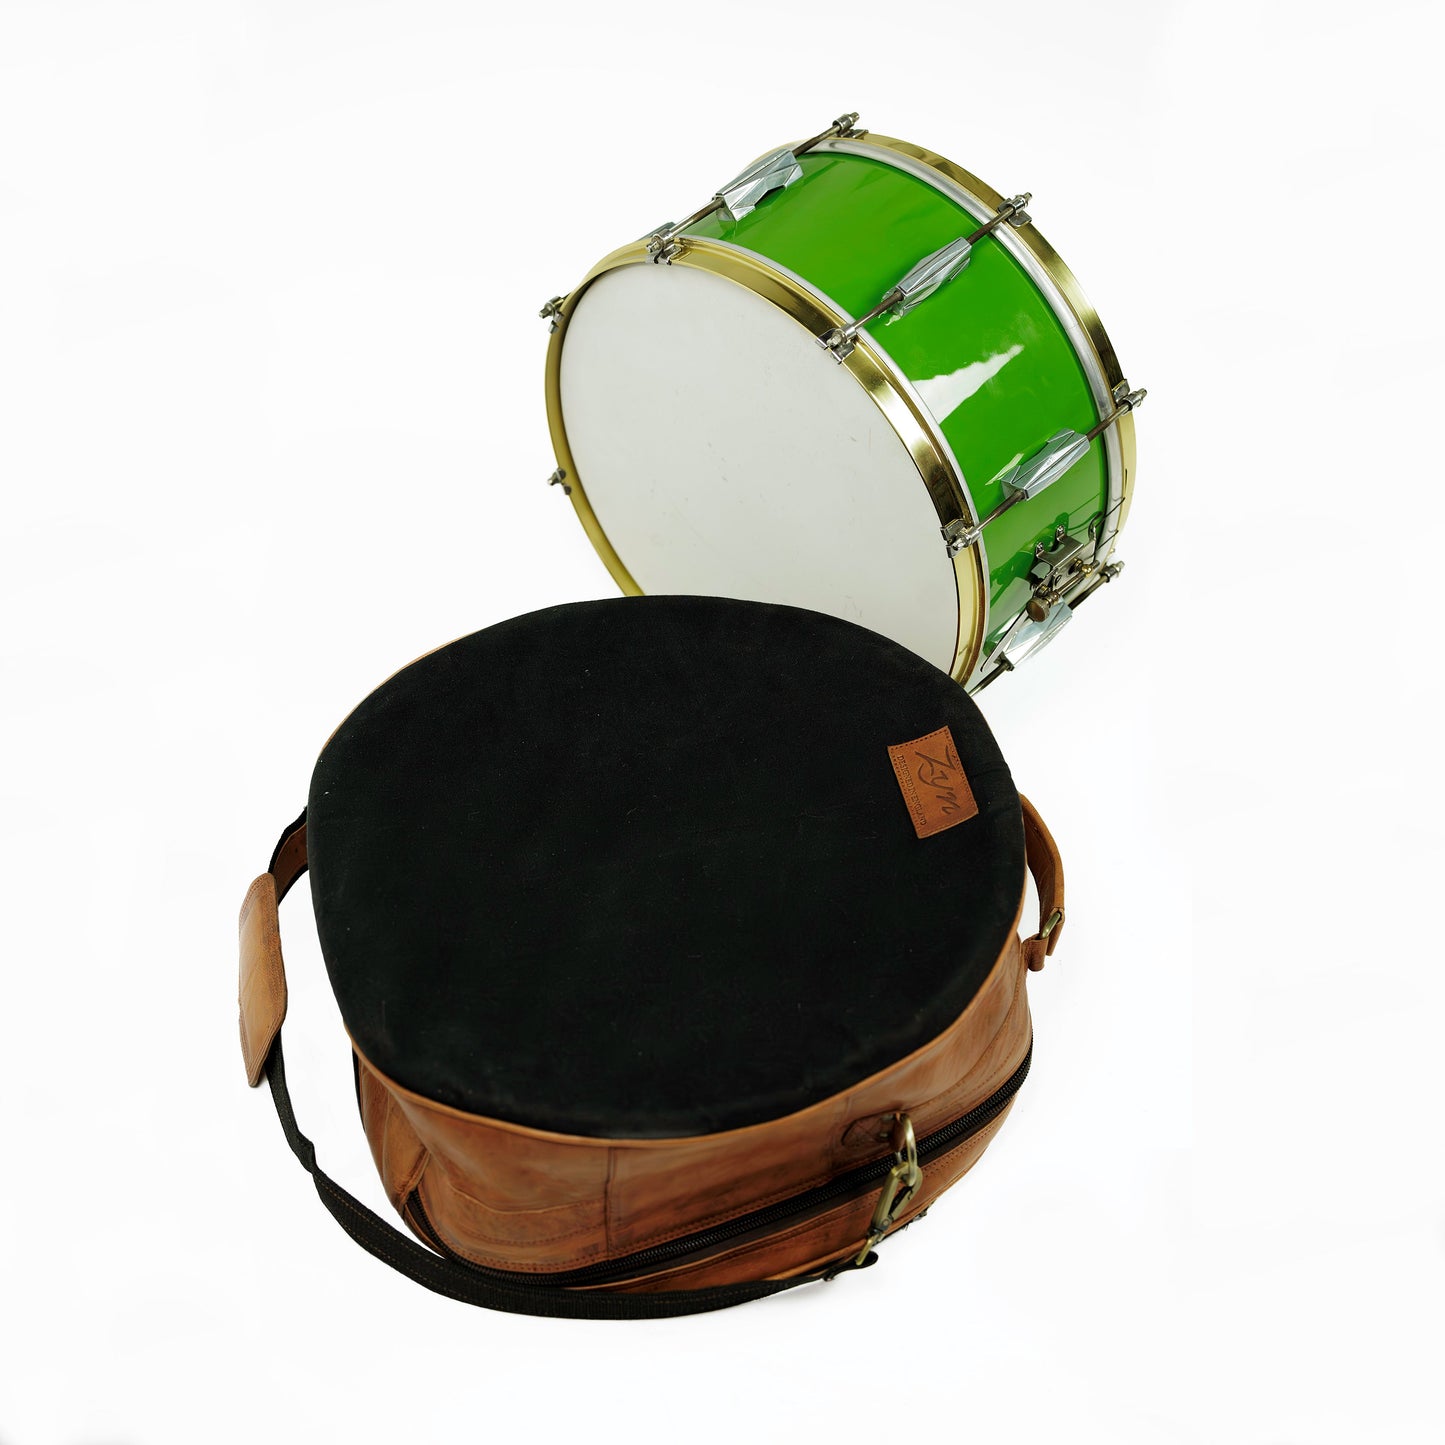 ZYN Luxury Leather Canvas Snare Bag - 14 inches